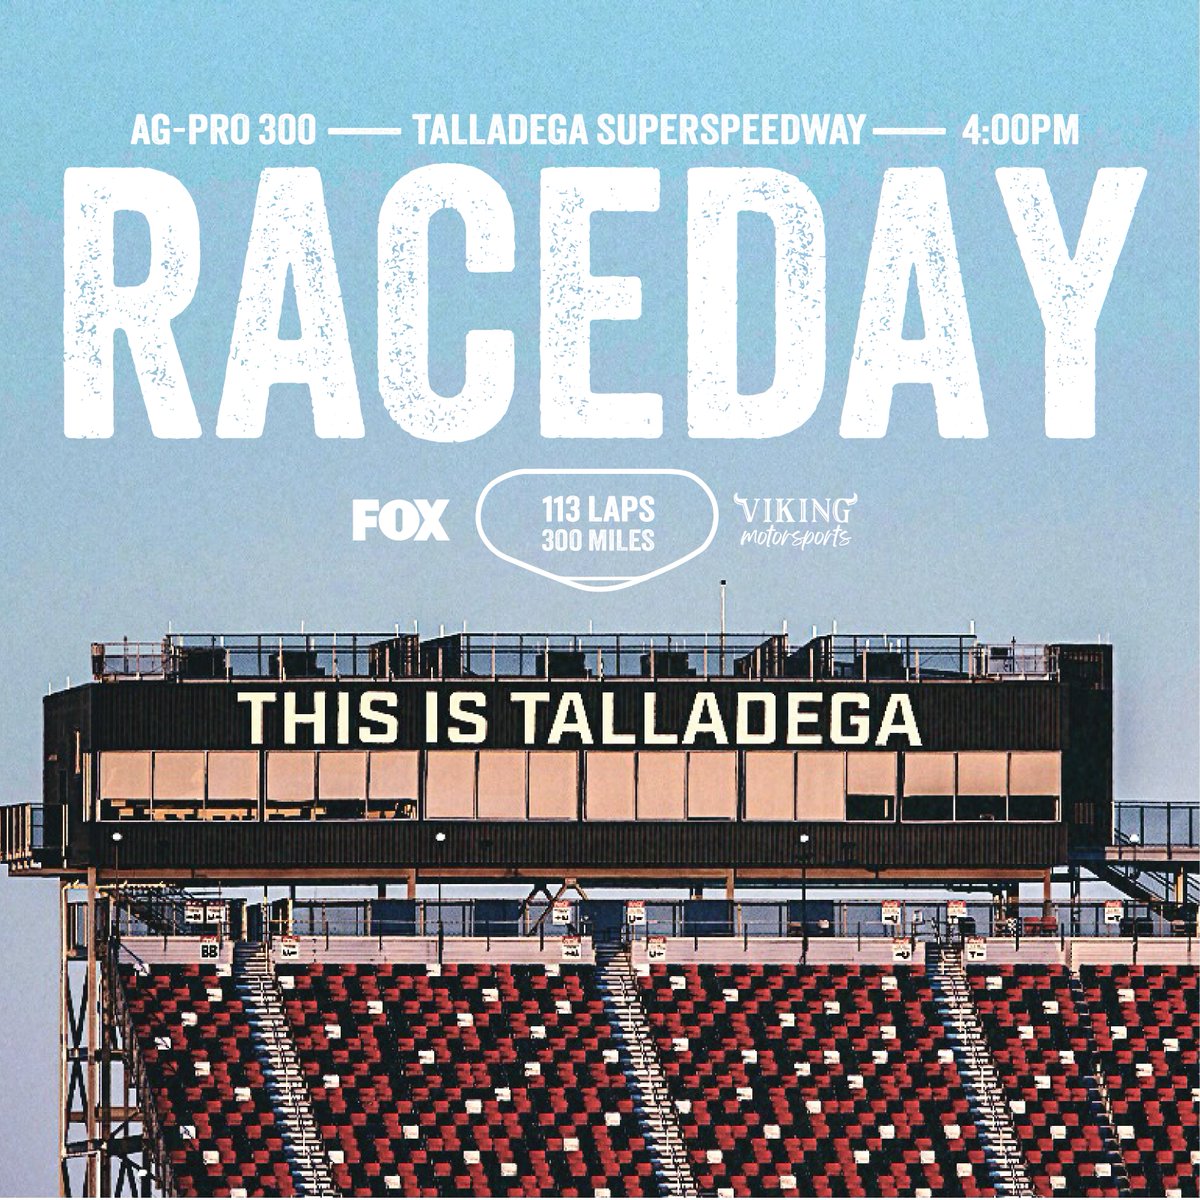 It's race day here at Talladega Superspeedway! We have another exciting day with Matt commanding the 38, showcasing a fresh paint scheme inspired by the children's book, 'The Girl Who Recycled 1 Million Cans.' Catch Matt reading the book in the fan zone this morning at 10:30! 🏁